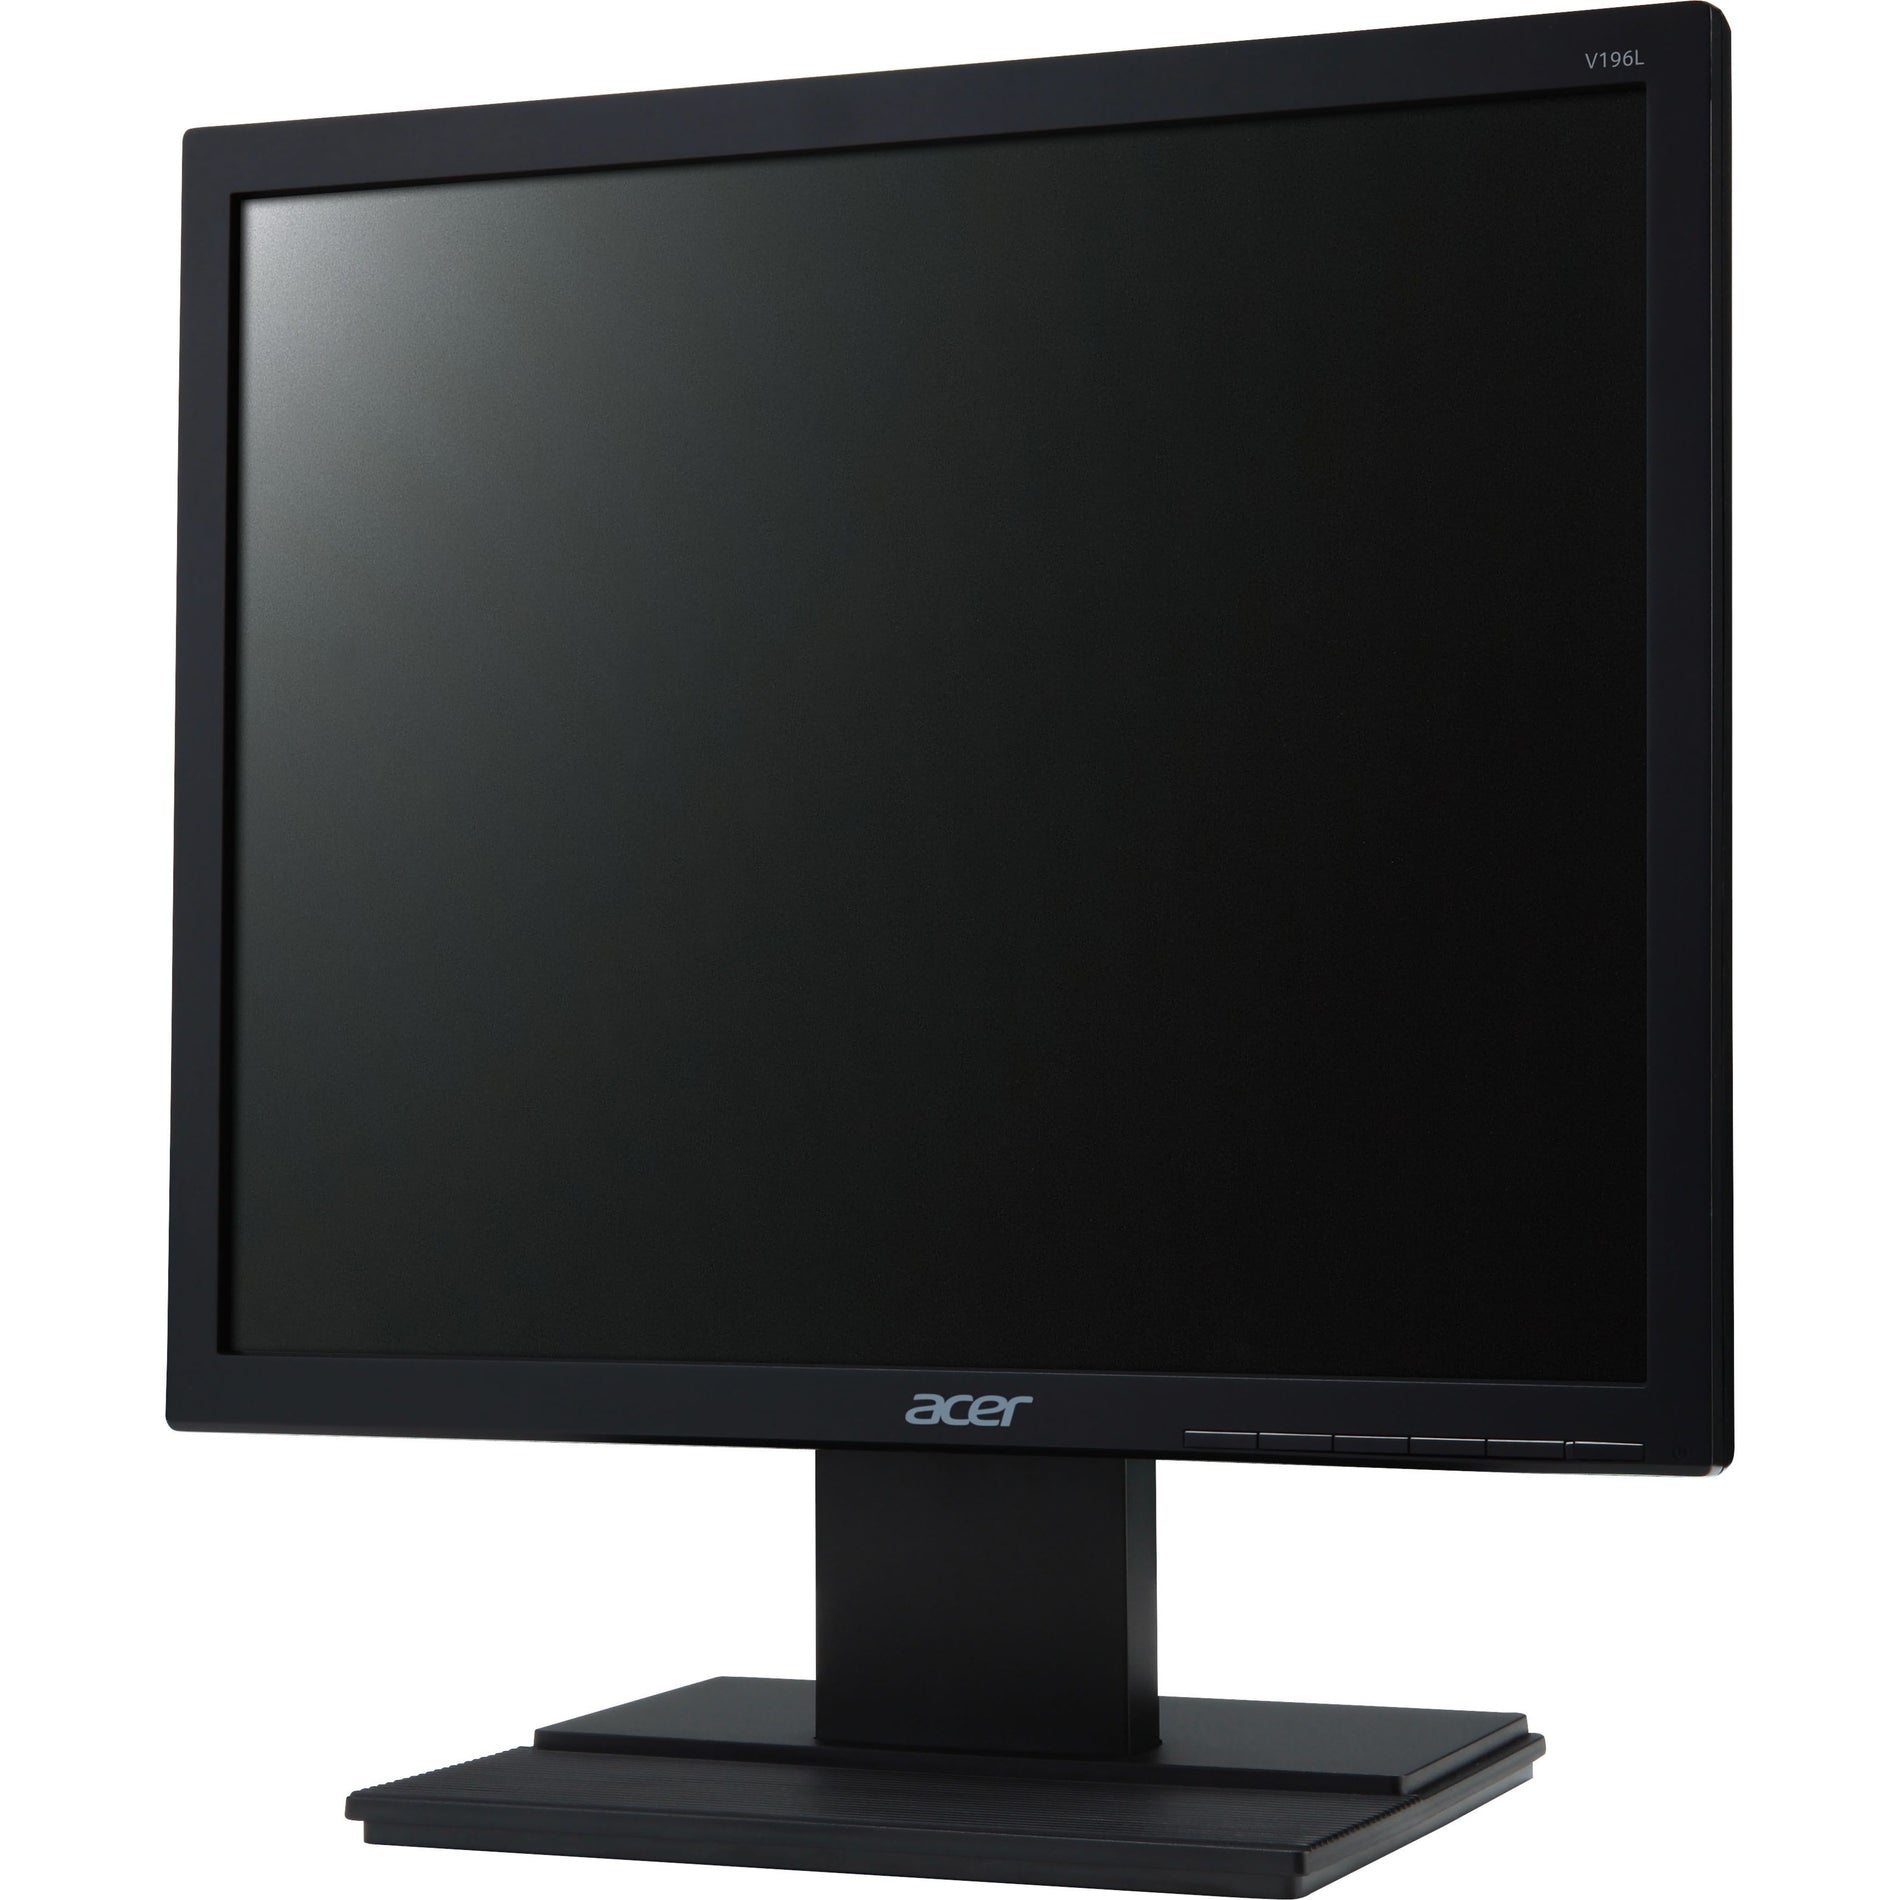 Acer UM.CV6AA.B01 V196L LCD Monitor, 19" 5:4 5ms 250 Nit LED, VGA DVI, Speakers, TCO Certified [Discontinued]